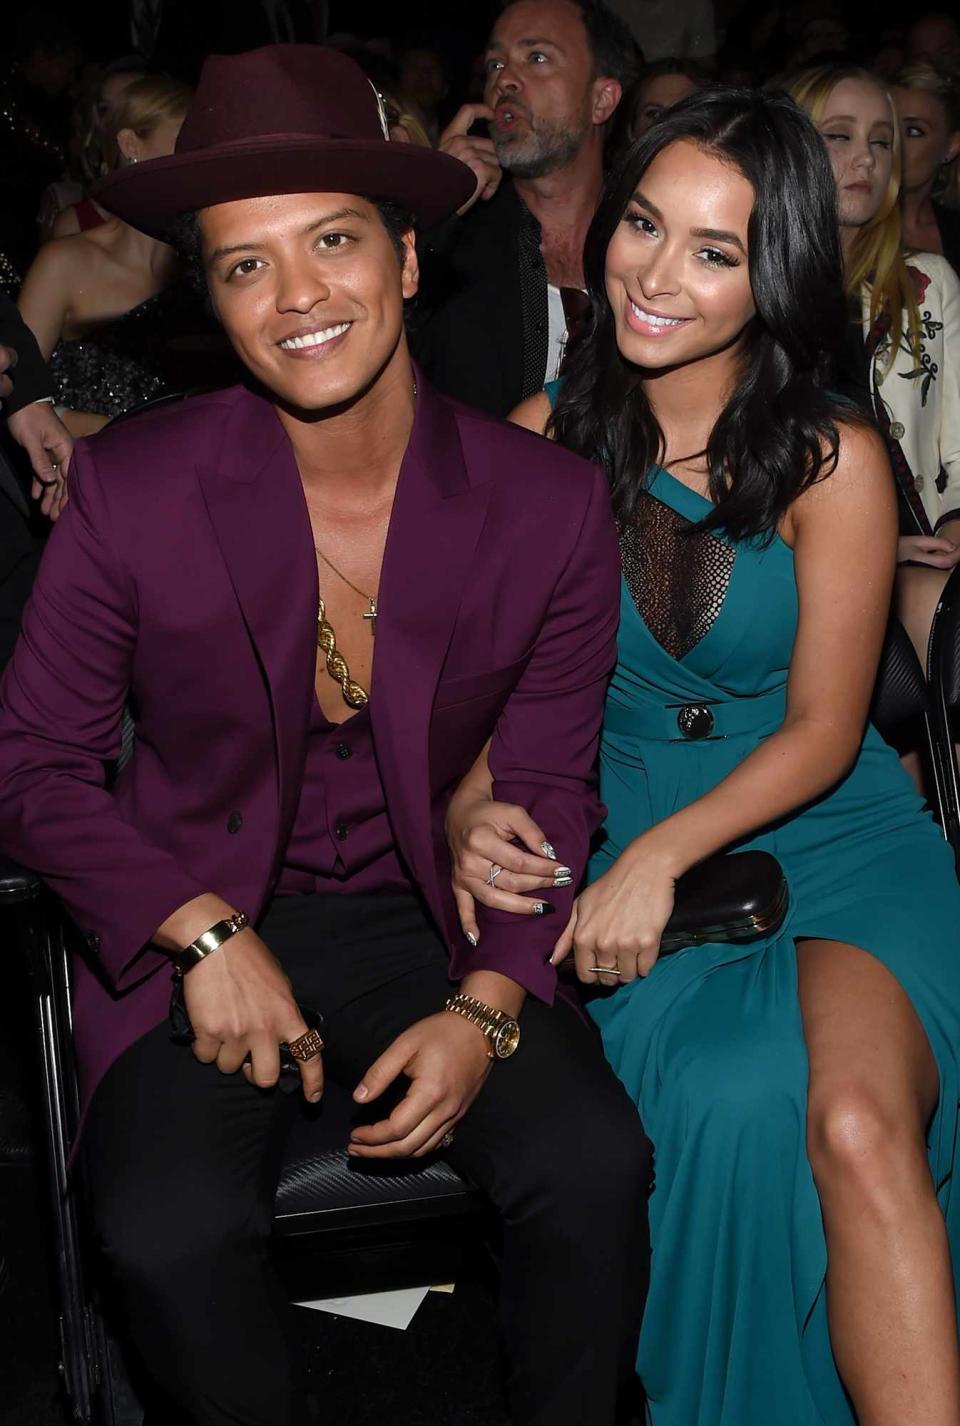 Bruno Mars (L) and Jessica Caban attend The 58th GRAMMY Awards at Staples Center on February 15, 2016 in Los Angeles, California